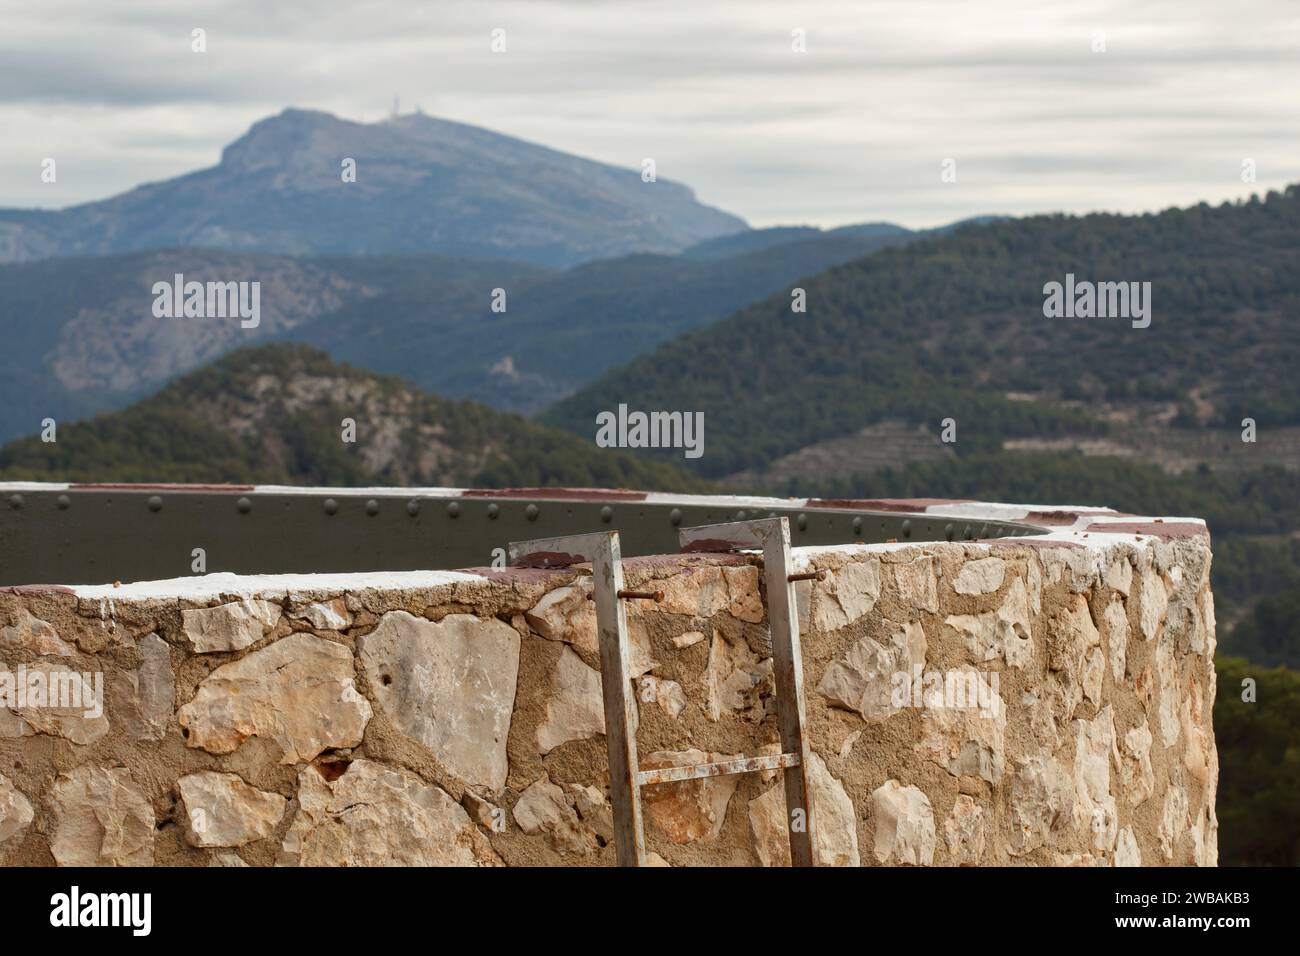 San Antonio of Alcoi fire water tank with layers of mountains in the background and the top of the Sierra Aitana, Spain Stock Photo